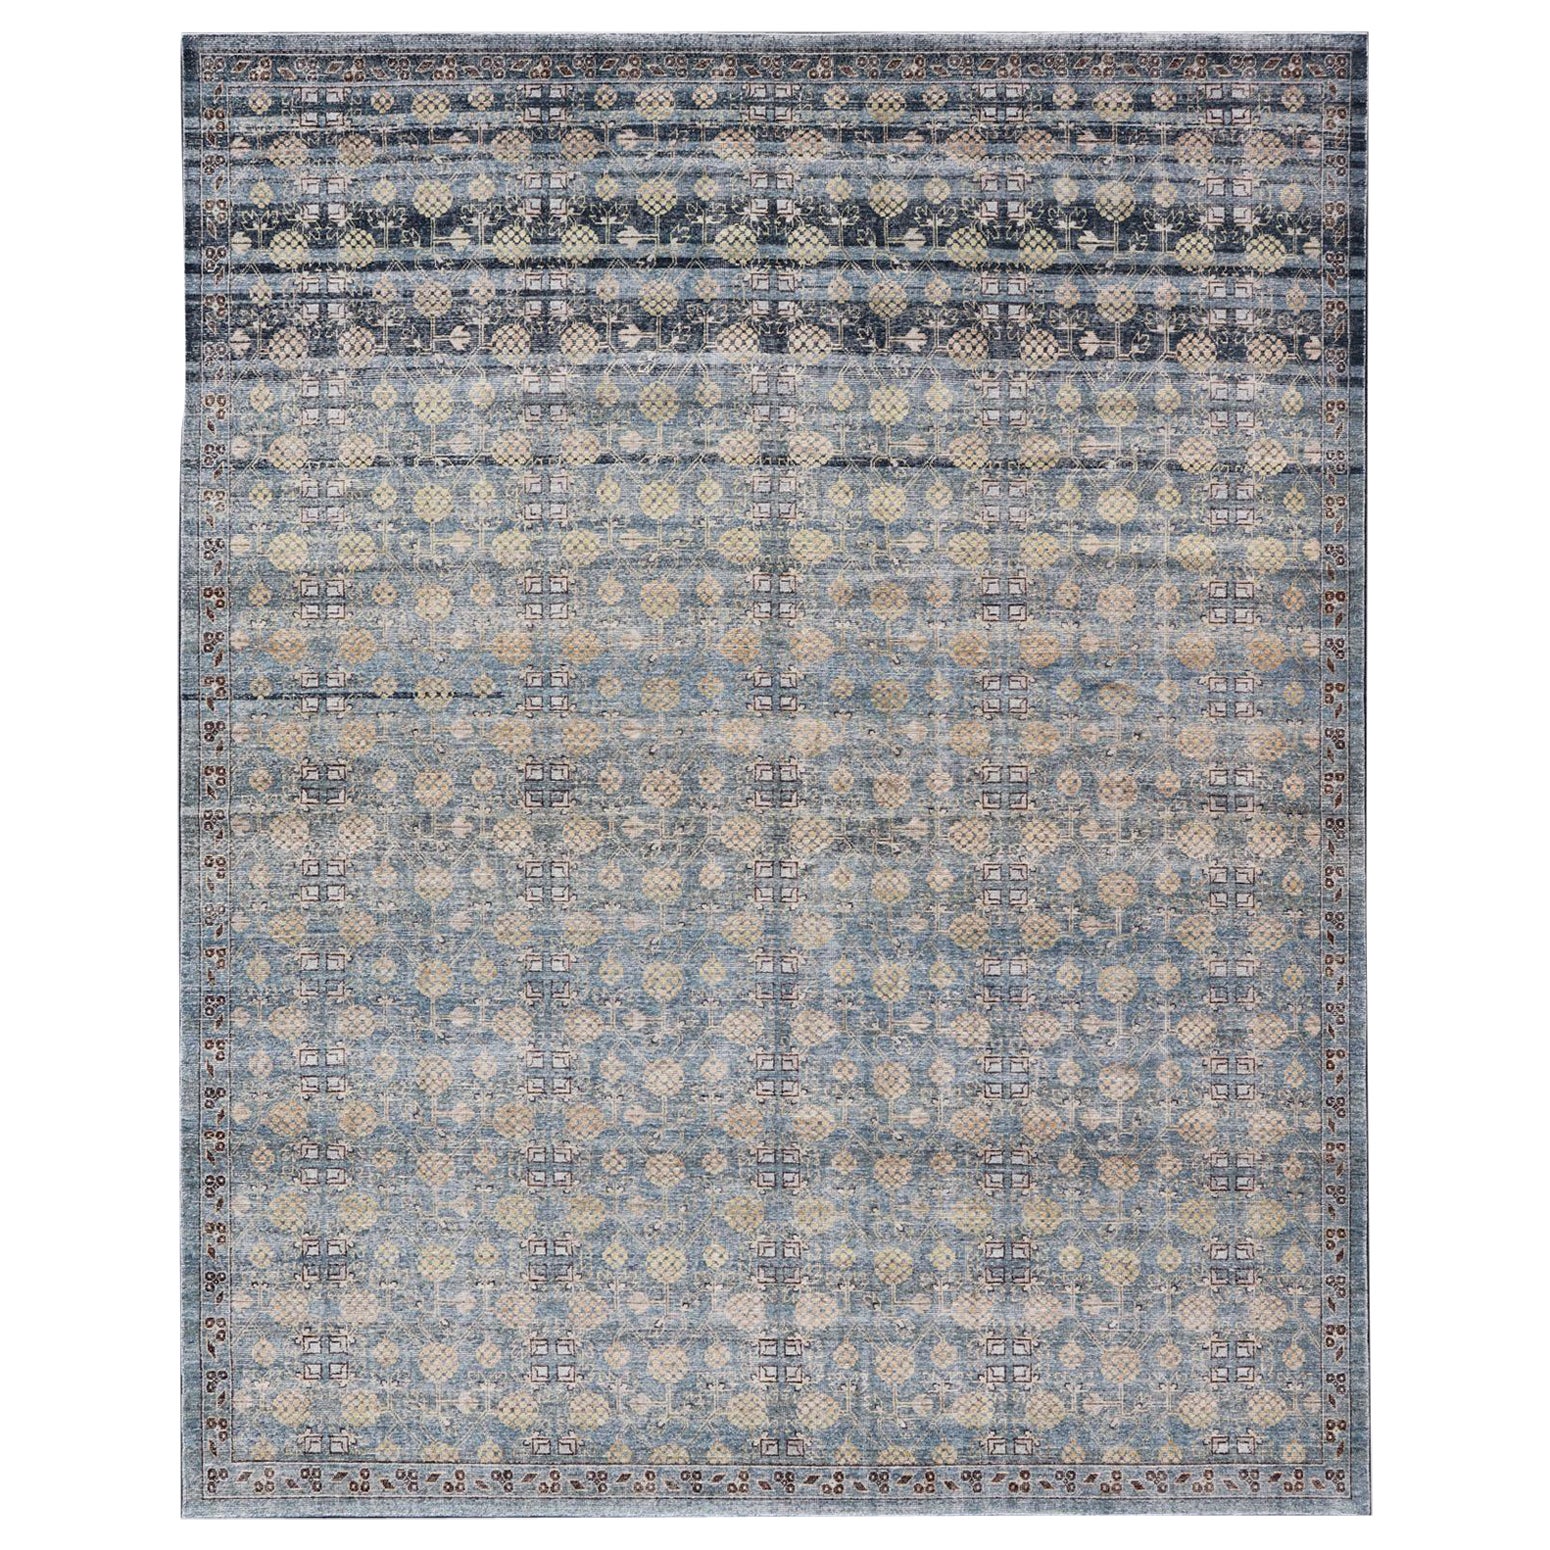 Modern All-Over Tribal Motif Khotan Area Rug in Dark Blues, Brown and Cream For Sale